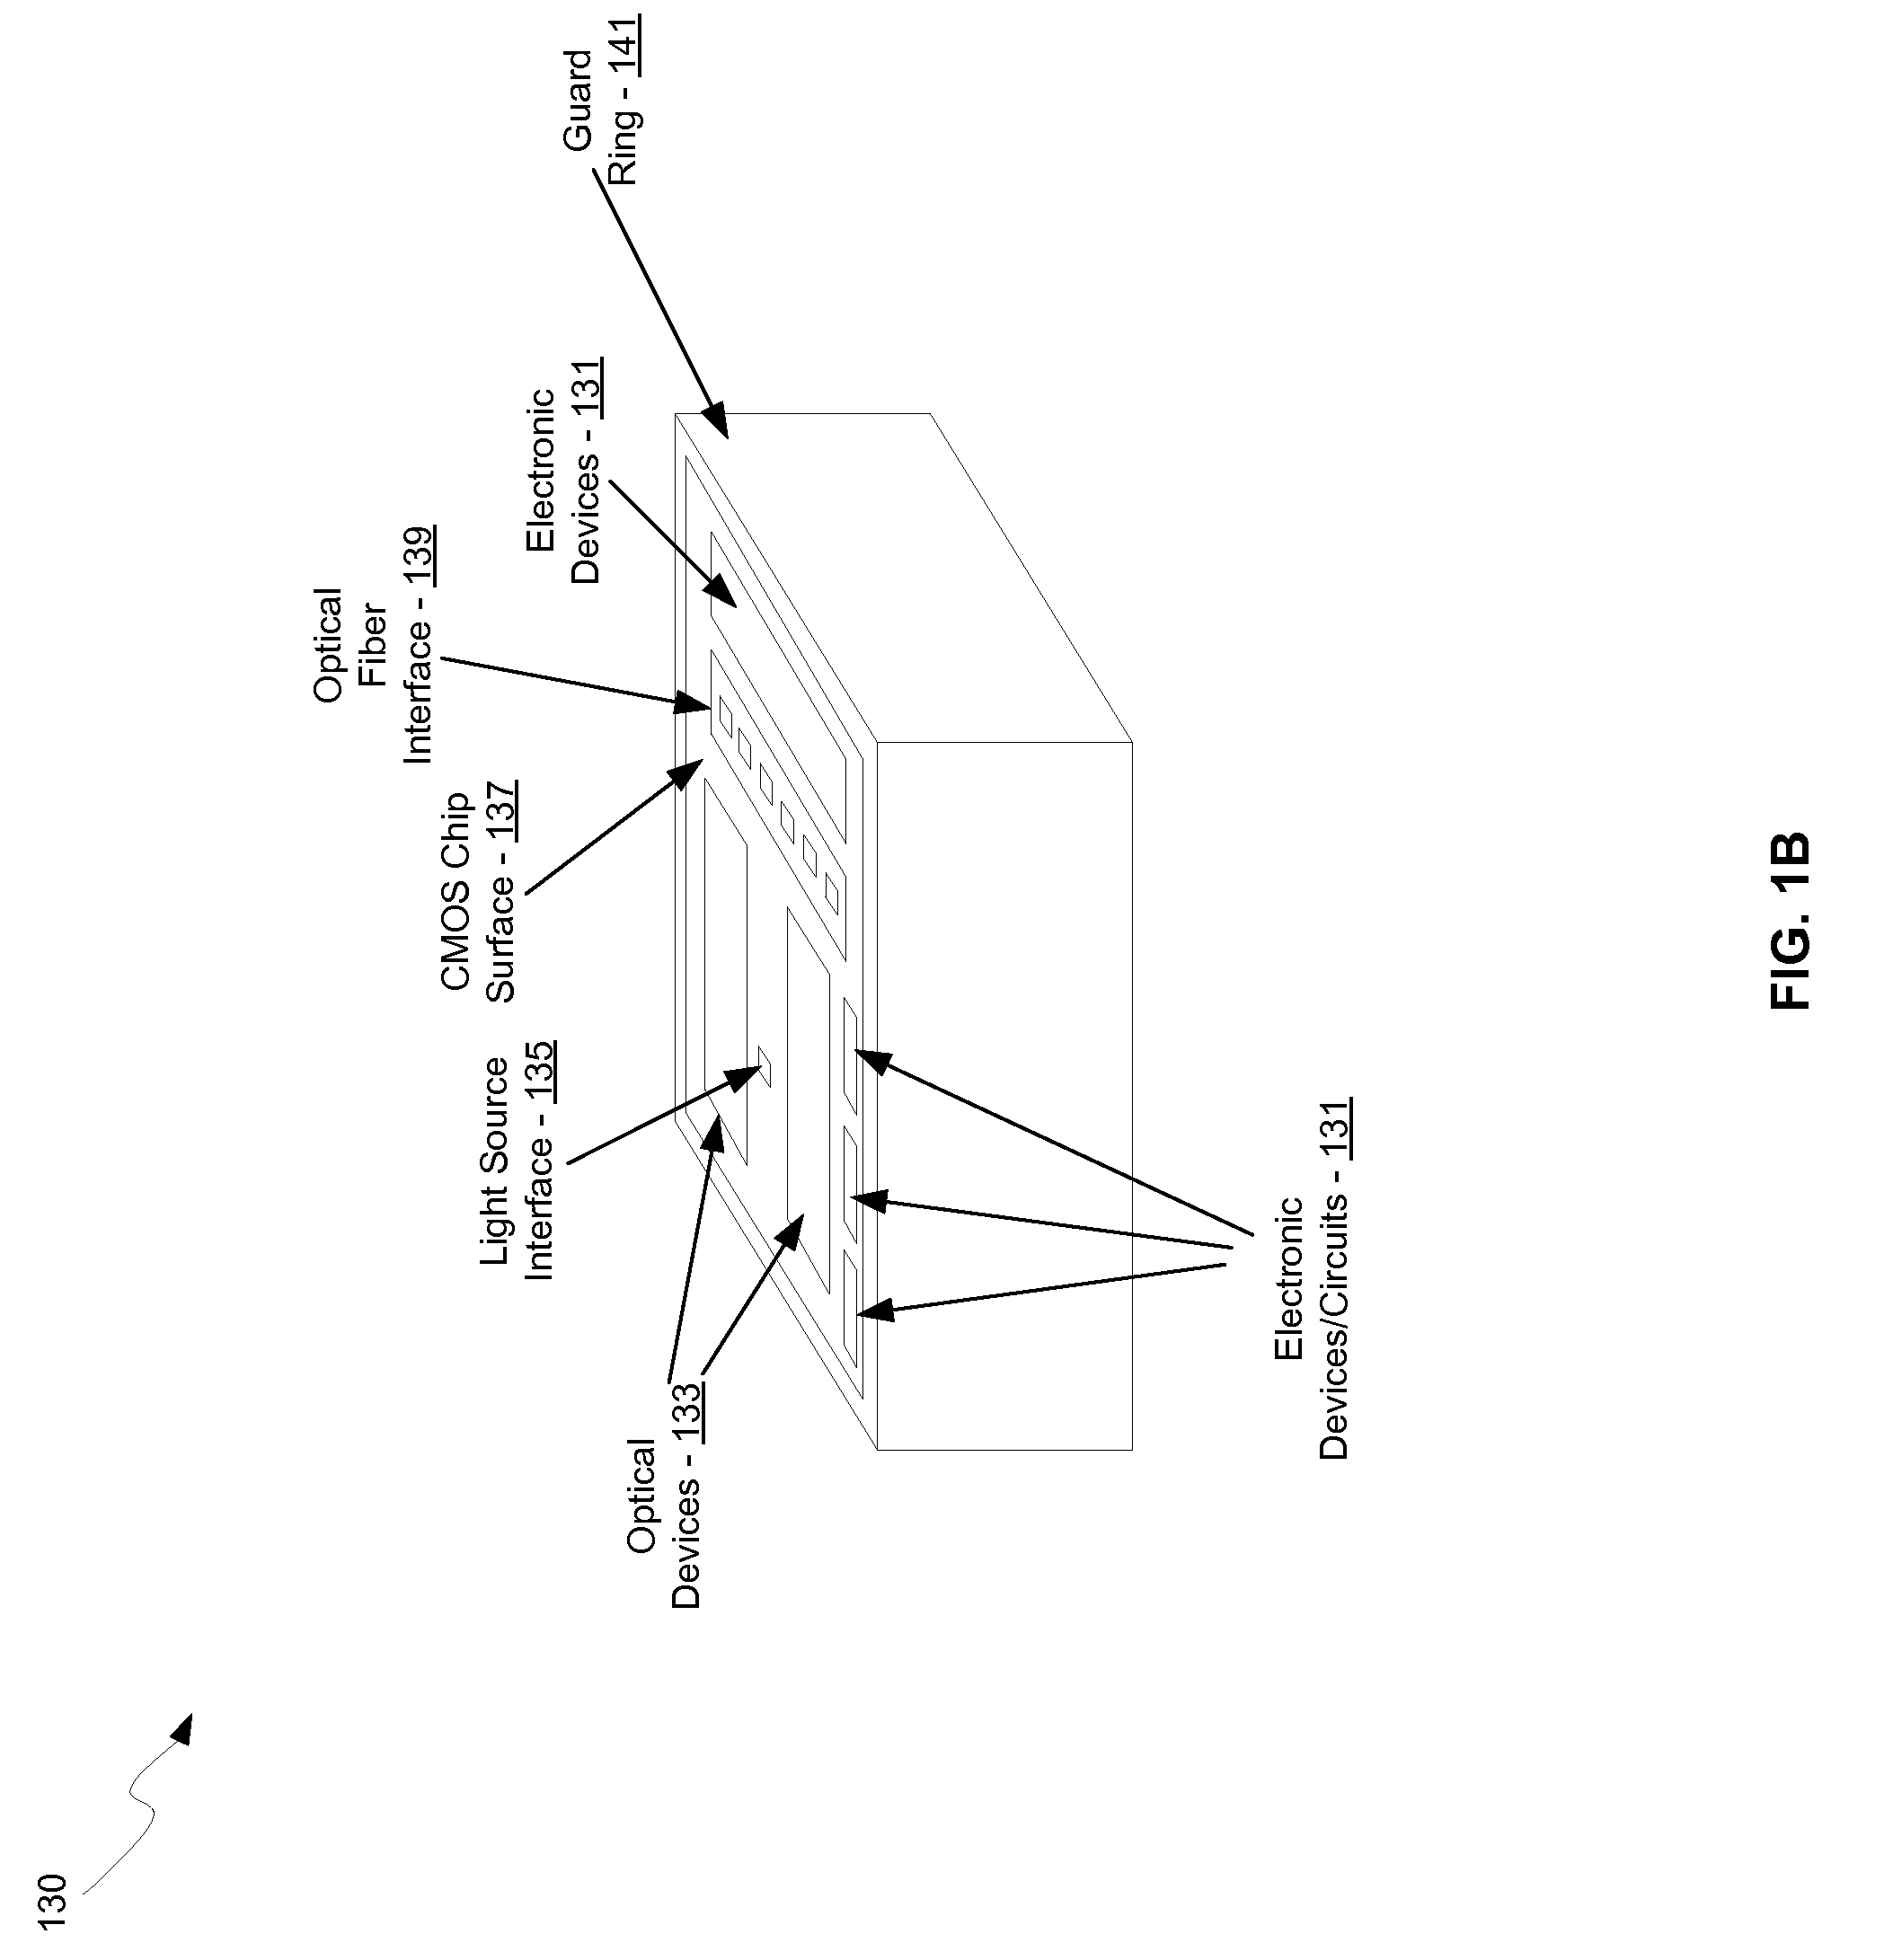 Method and system for monolithic integration of photonics and electronics in CMOS processes